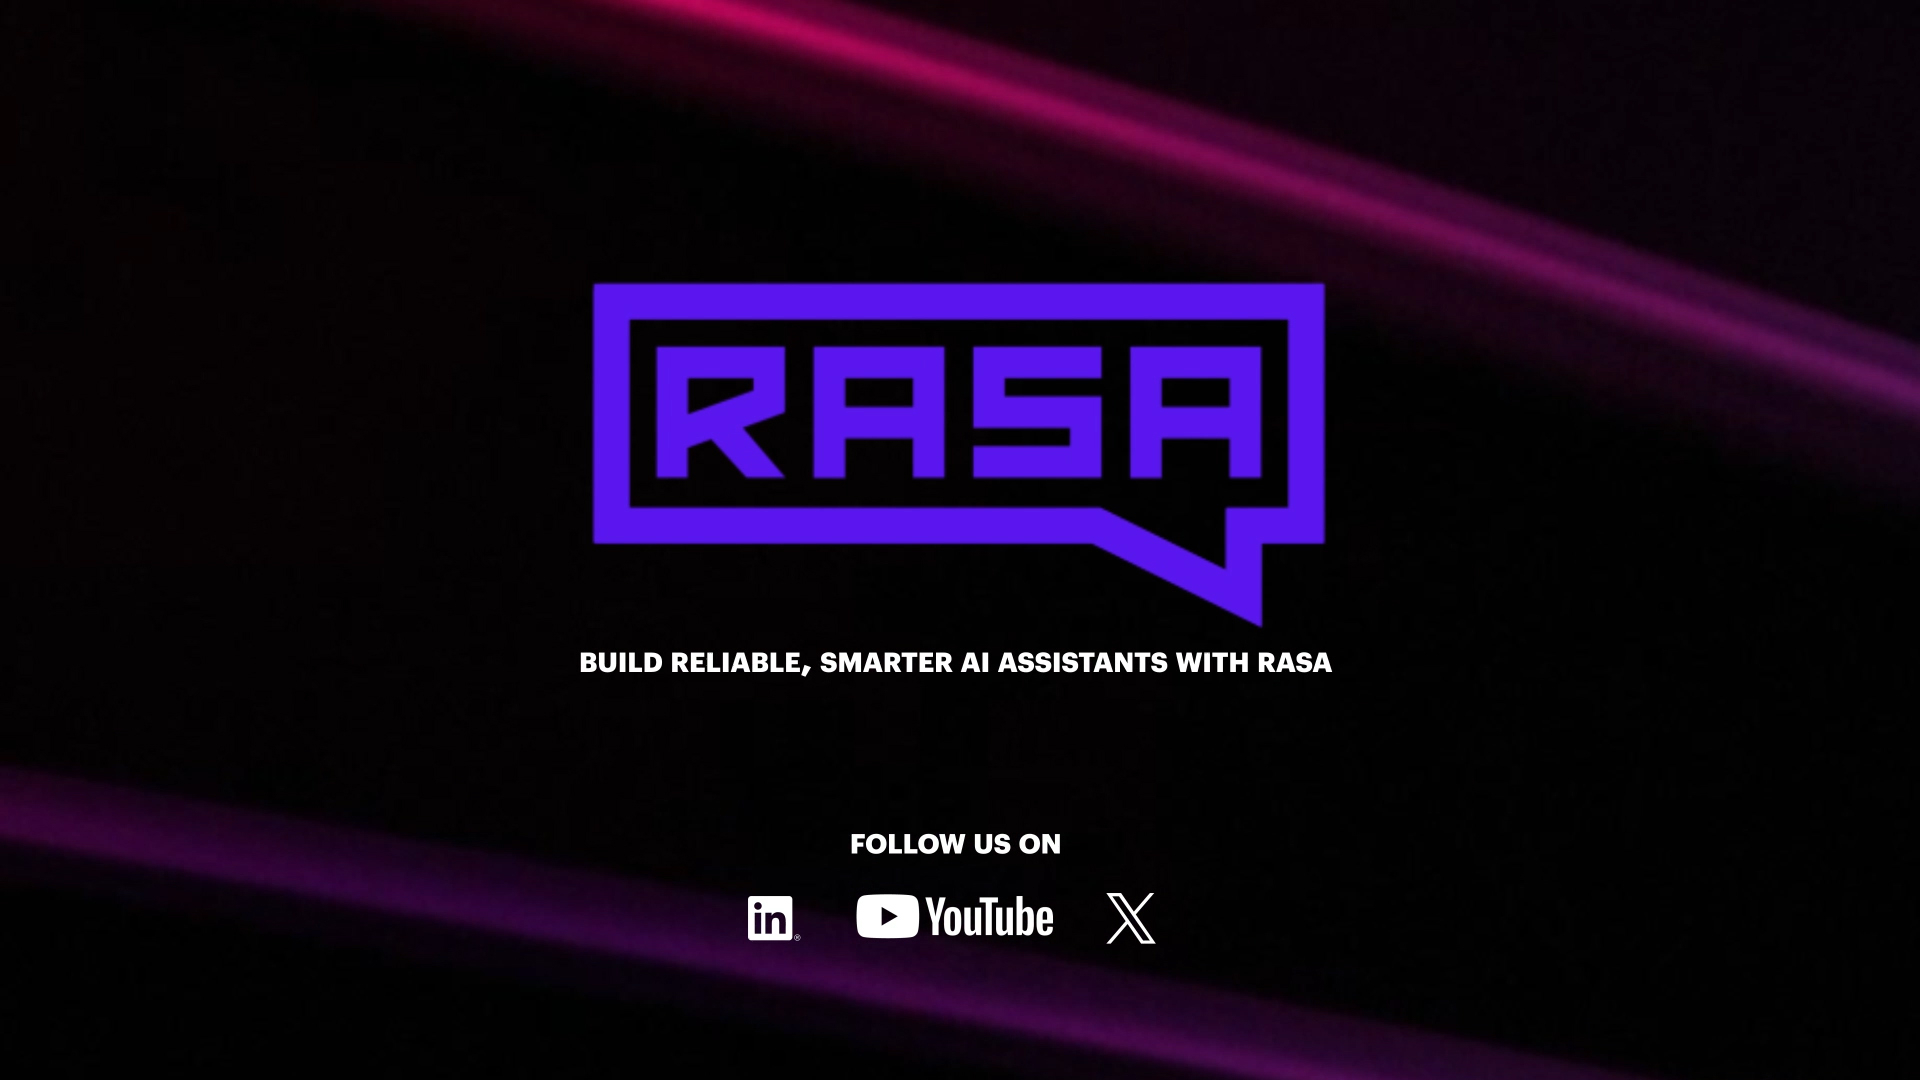 Discover how Rasa has radically advanced the frontiers of enterprise AI. The future is now. The new generation of AI assistants is here, unleashing the full potential of generative AI. For the first time, Rasa is democratizing generative AI, empowering you to foster fluent and natural conversations with your customers. You can easily design, tune, and deploy AI assistants that are reliable and trustworthy.